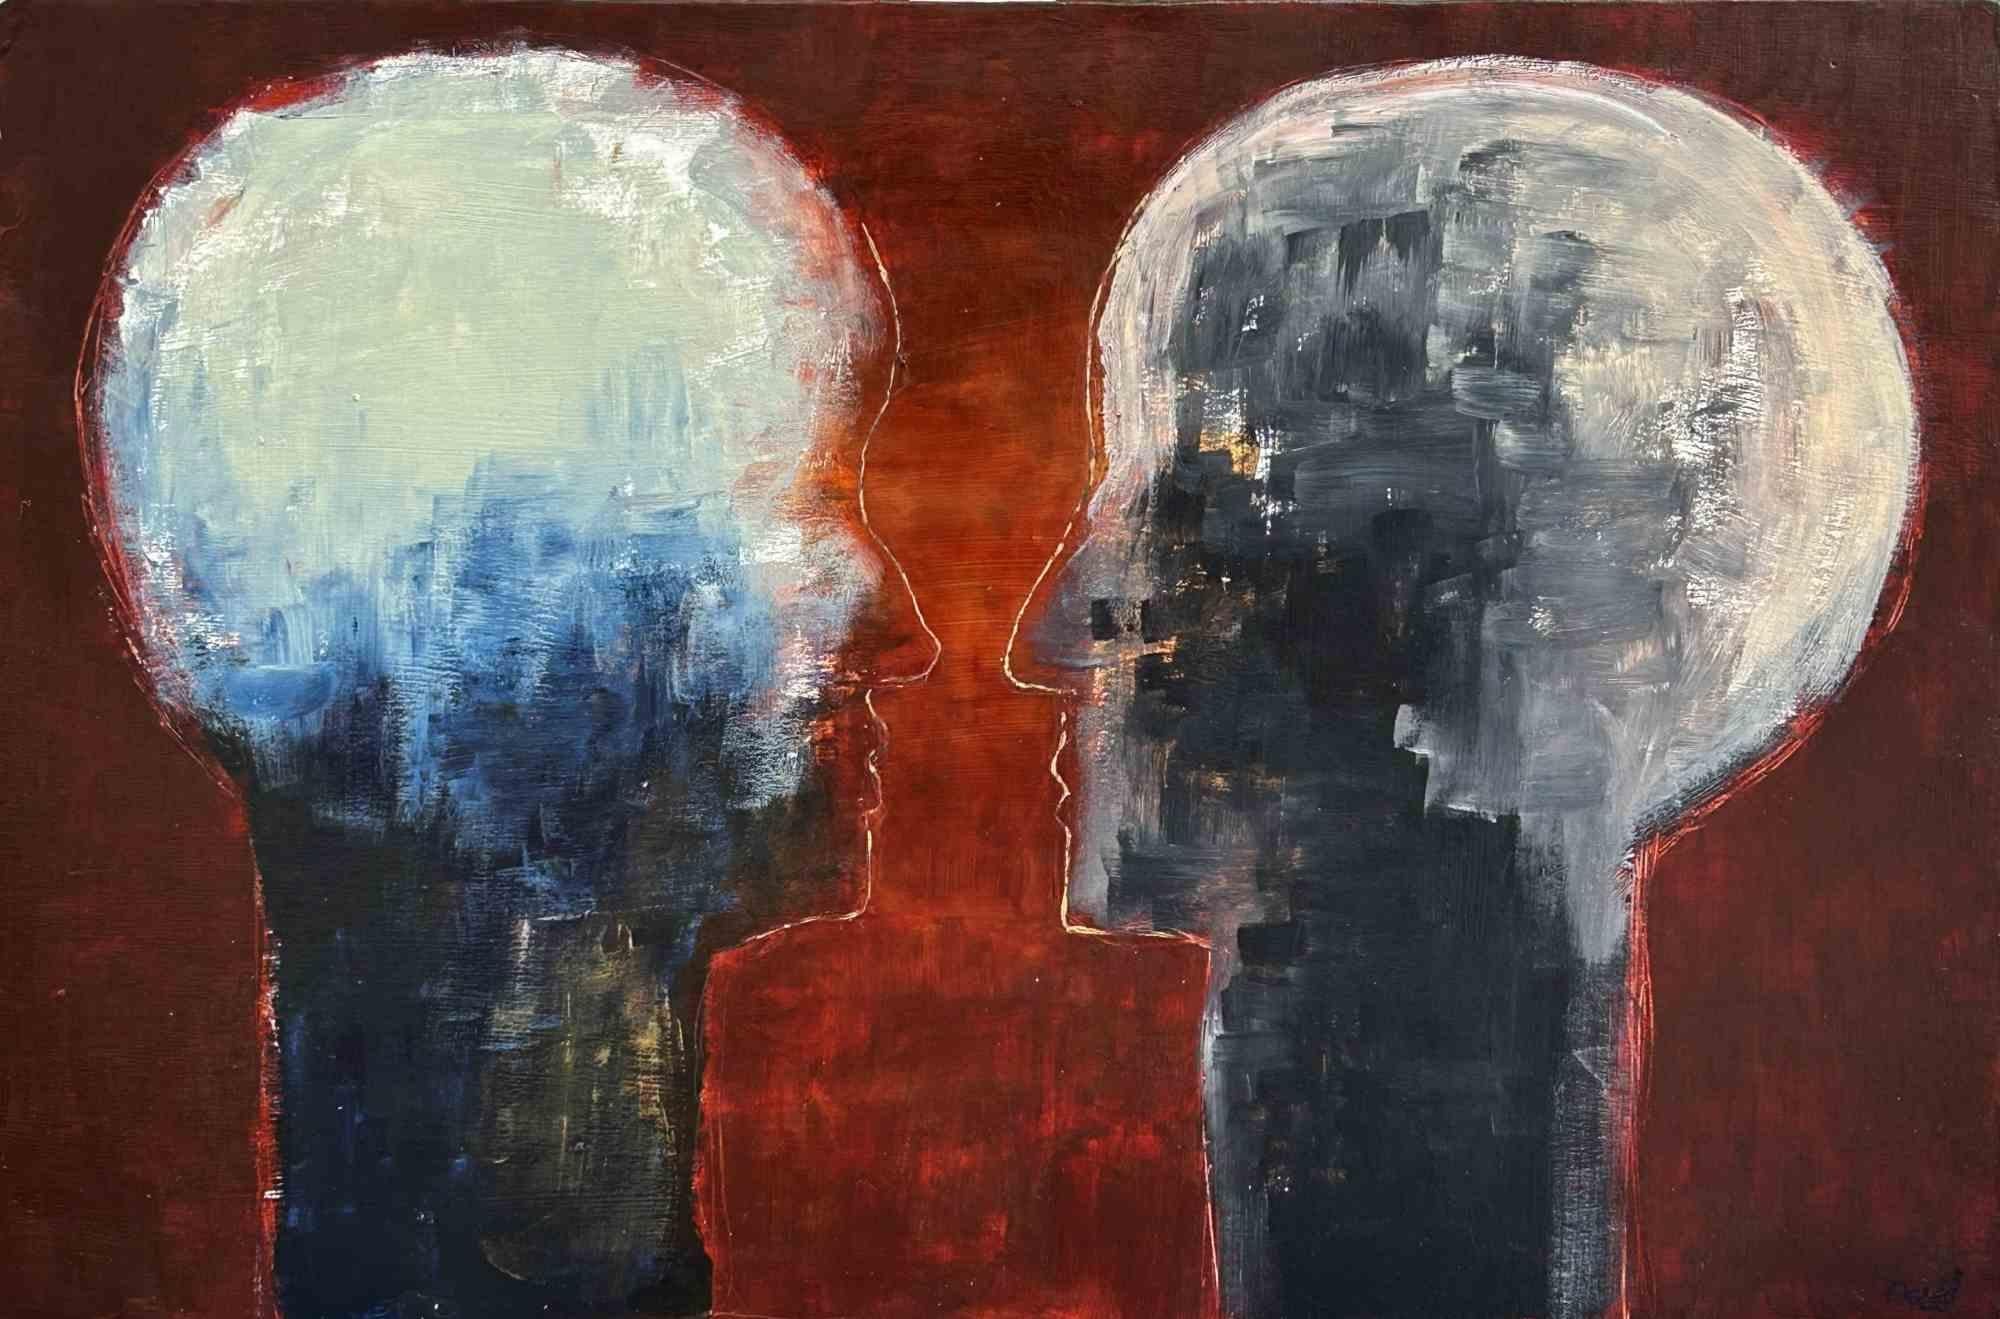 Talking Heads - Painting by David Euler - 2022